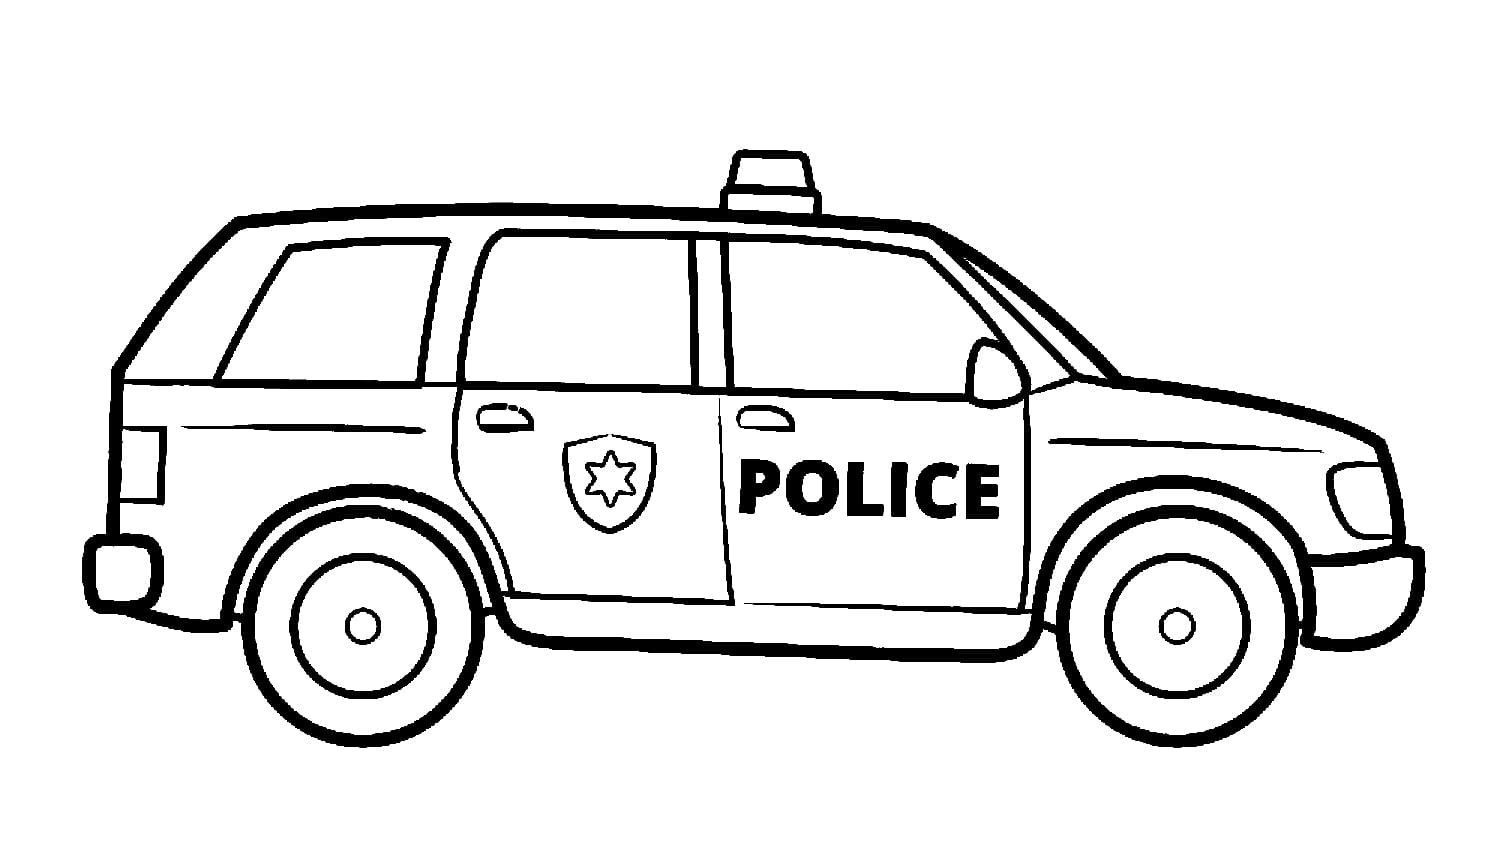 Police Car Coloring Pages | Printable Coloring Pages